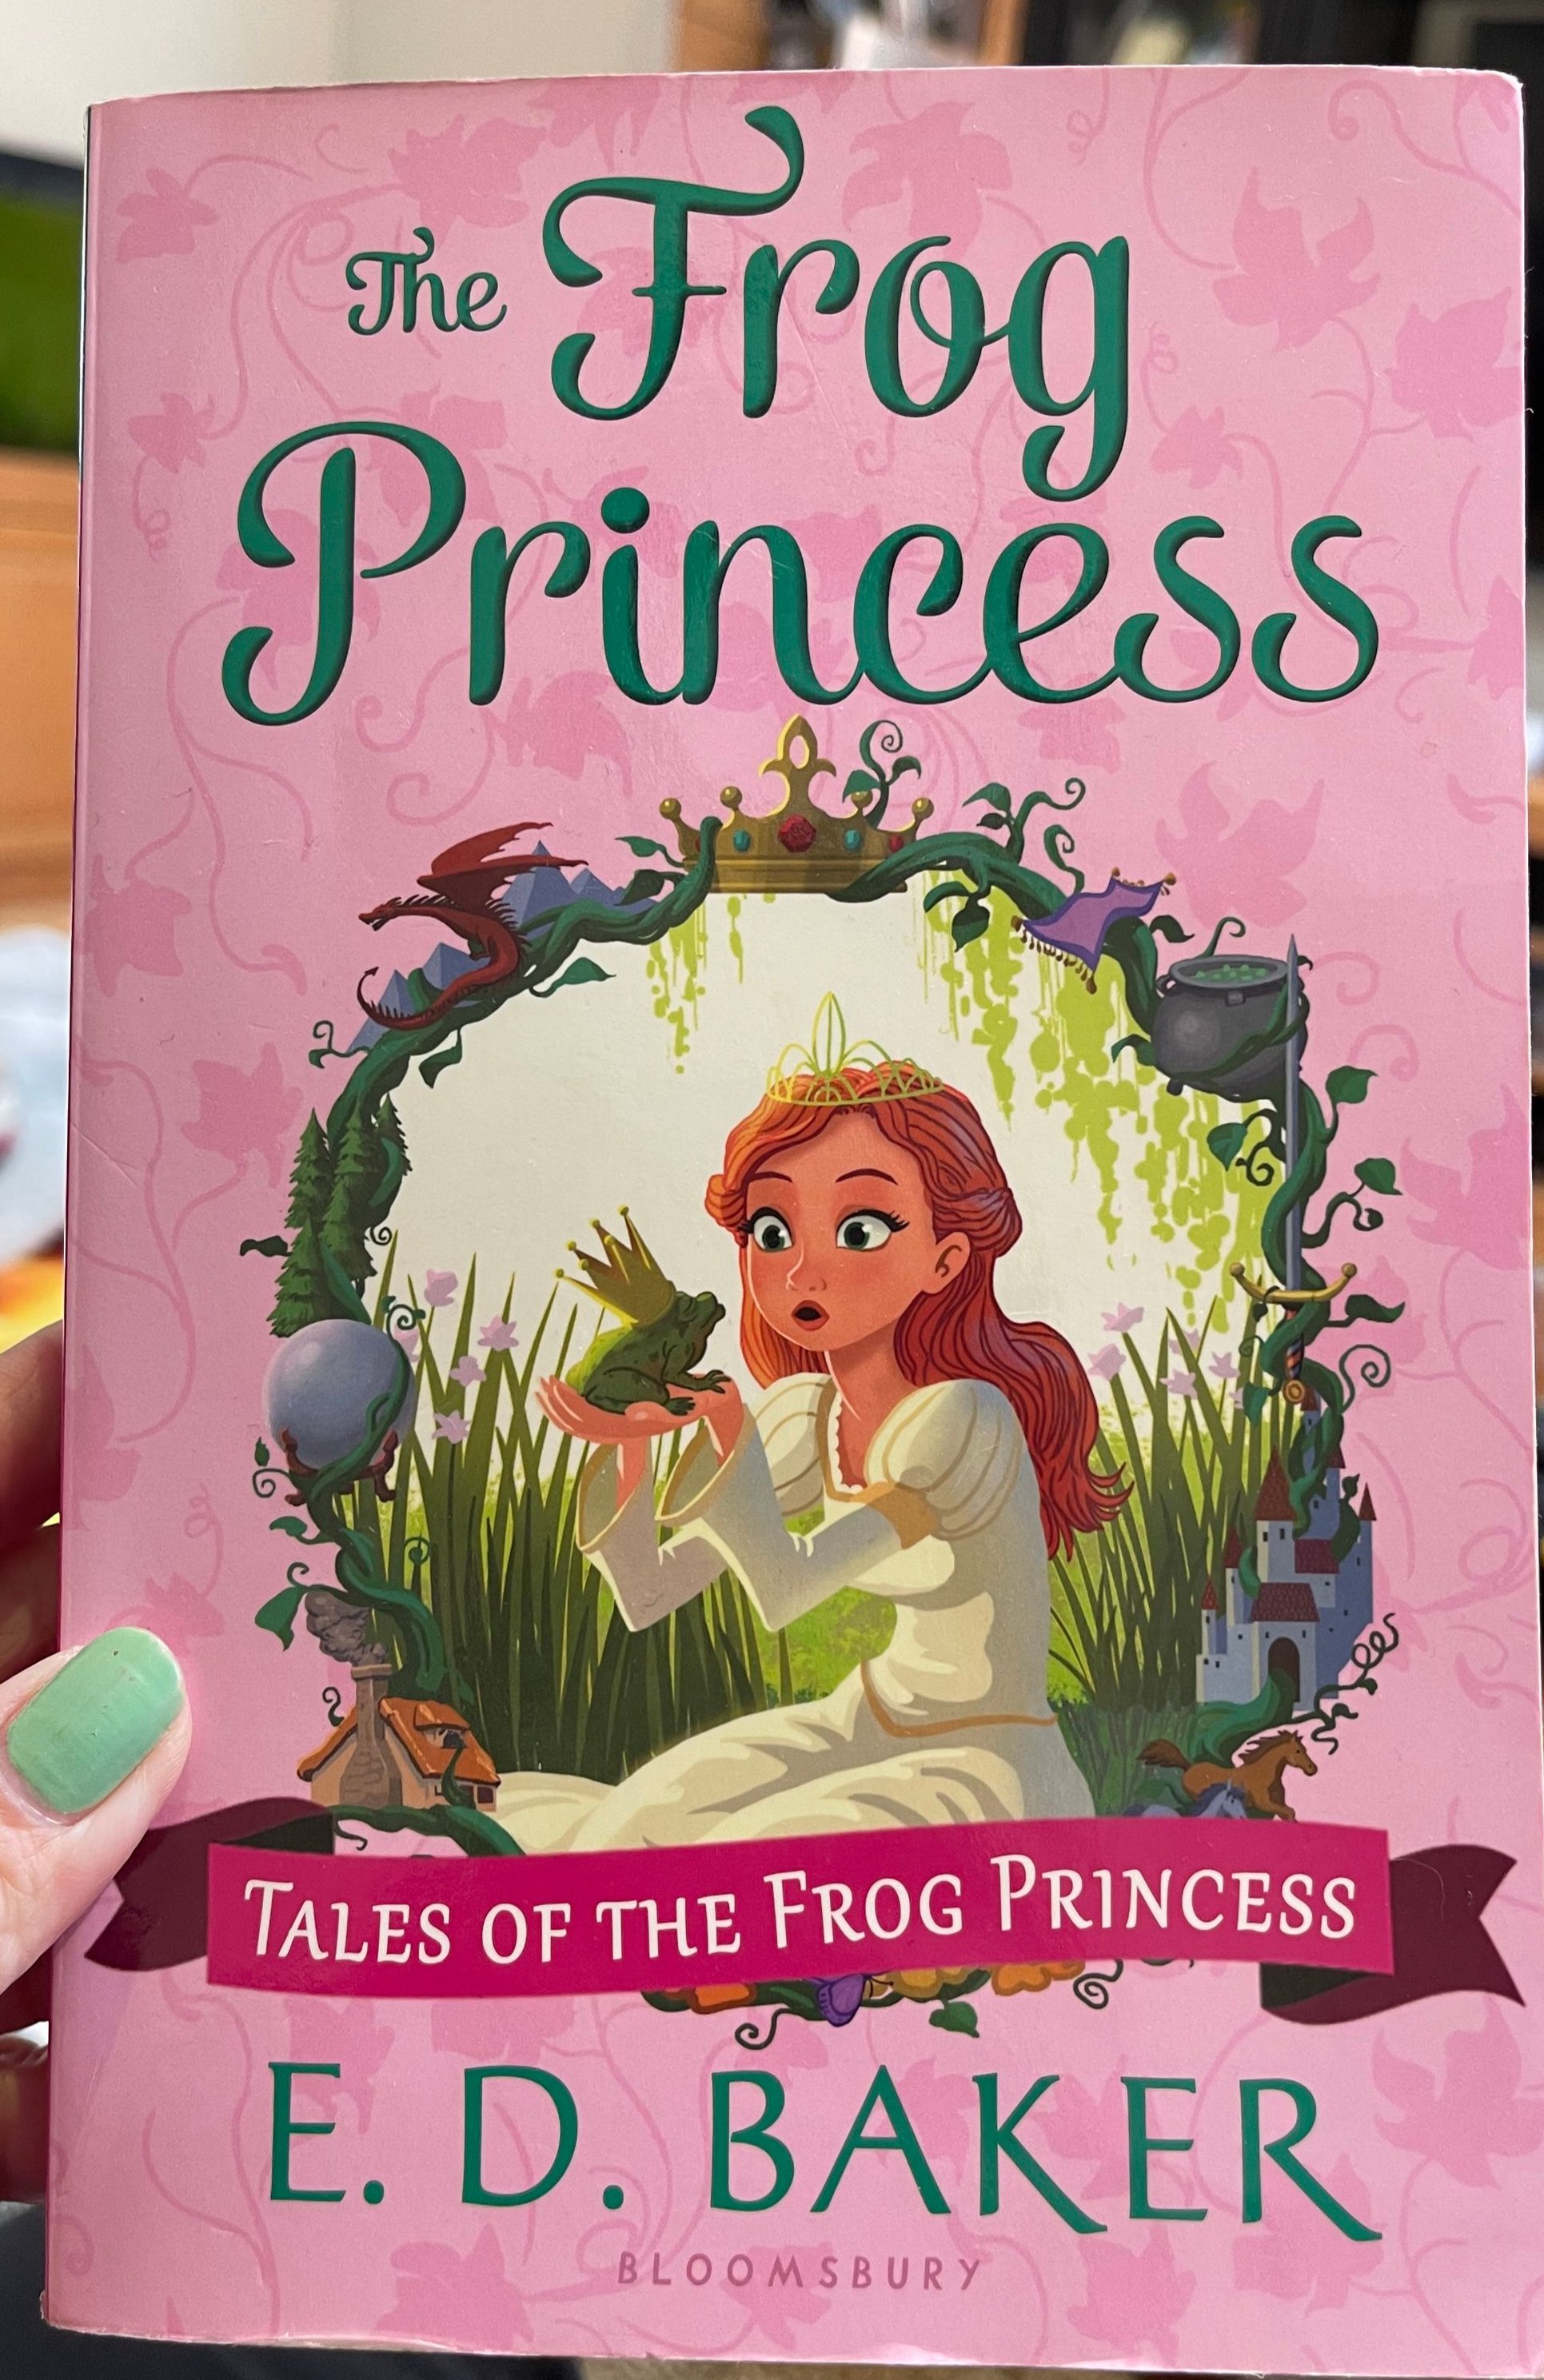 The+Princess+and+the+Frog+Cover.jpg